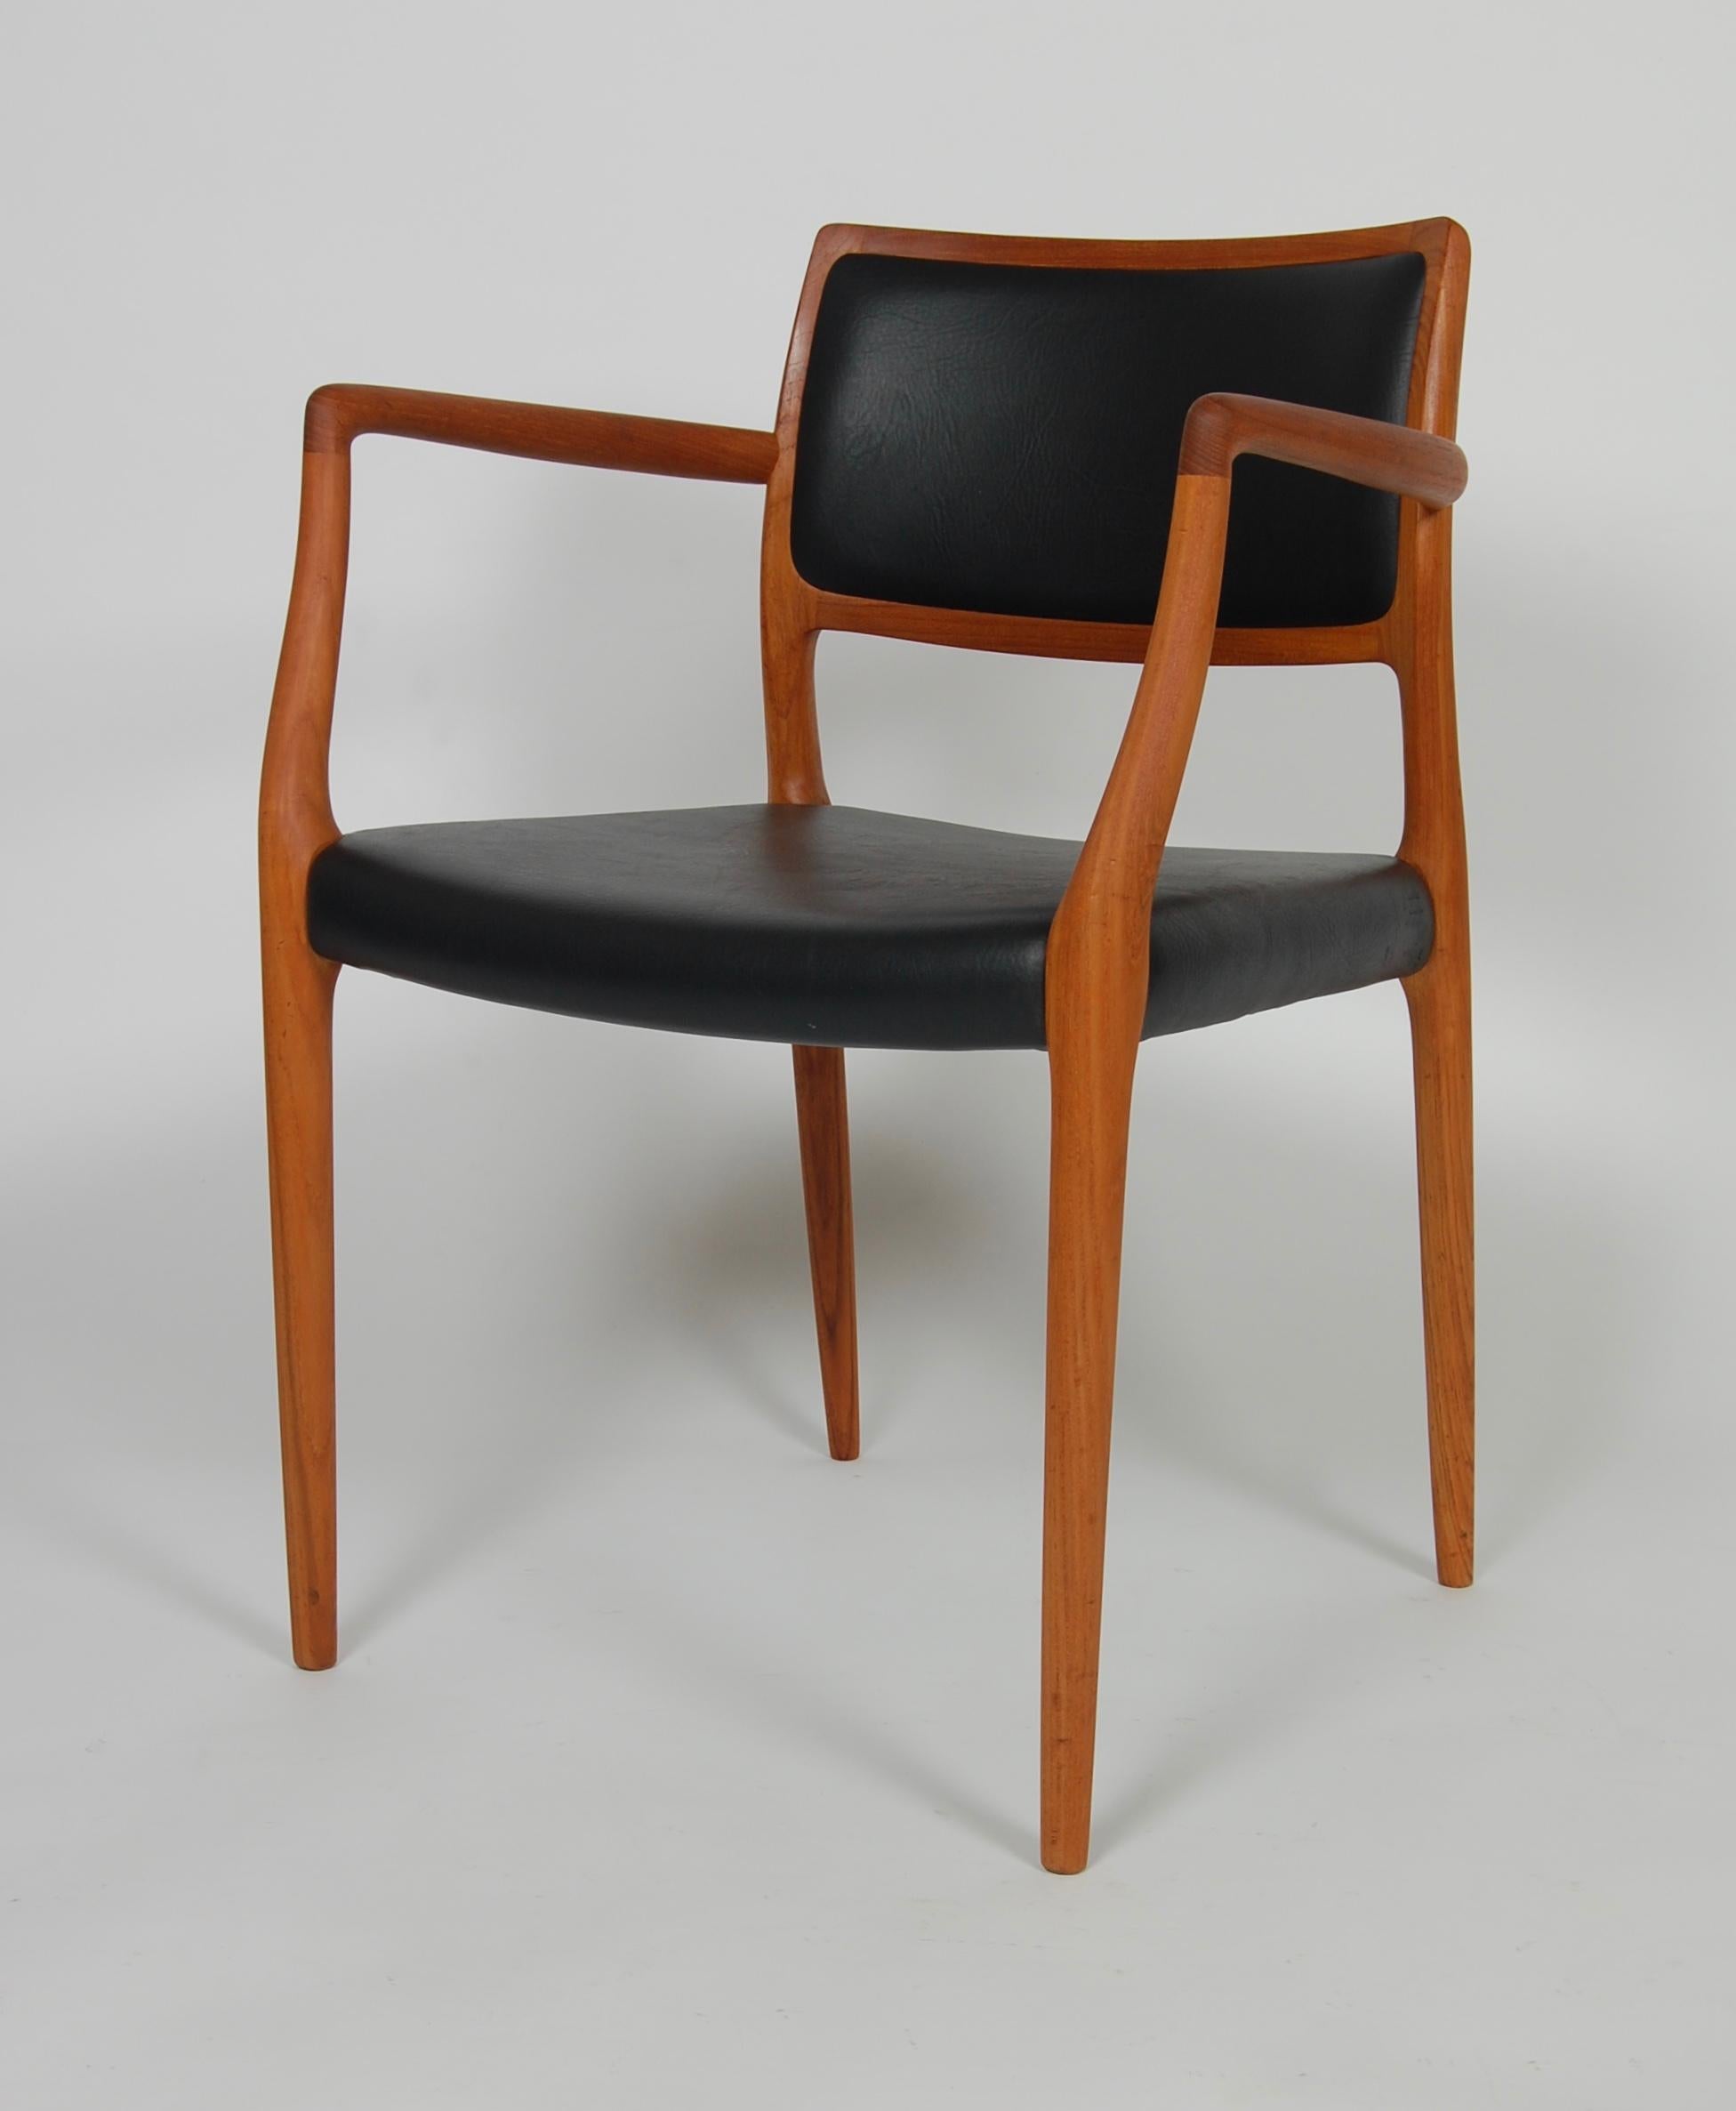 A simple and elegant design with wonderful ergonomics by designer Niels Moller, graceful and delicate lines to the teak frame, upholstered in heavy weight black leather.